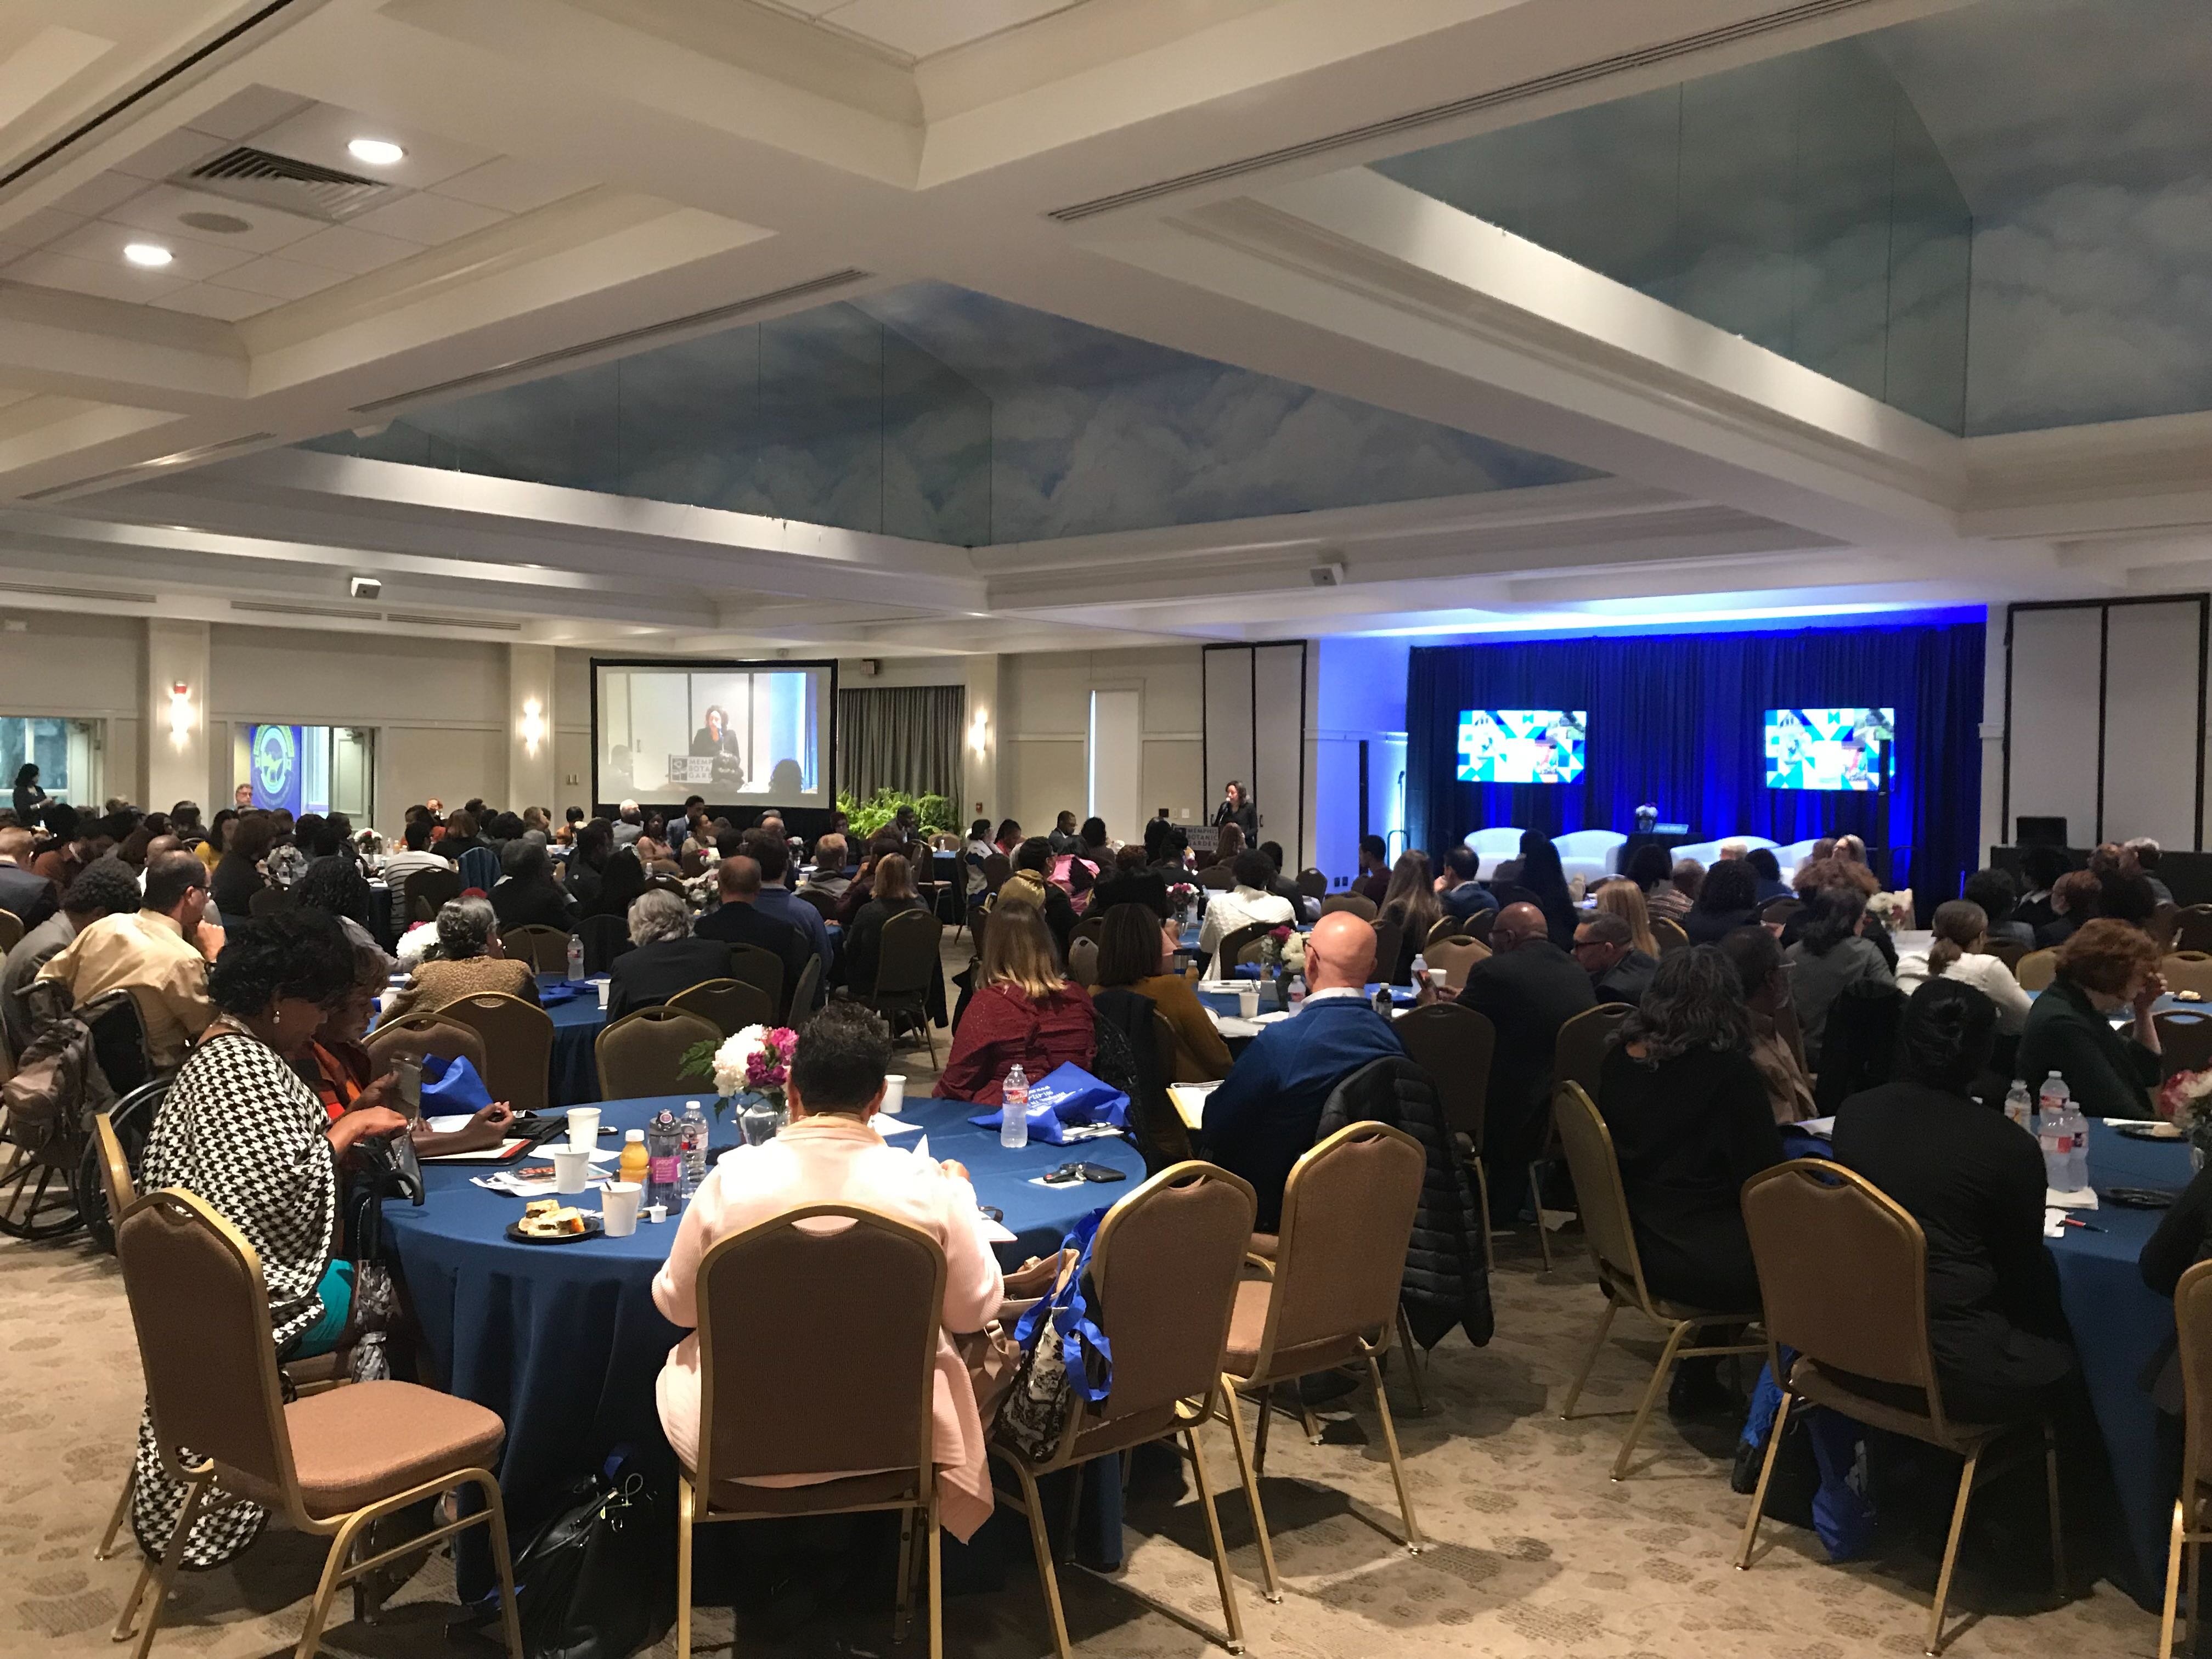 The 2019 State of Memphis Housing Summit was held at the Memphis Botanic Gardens on October 29. It was attended by roughly 200 government officials, community leaders, business leaders and nonprofit representatives. (Cole Bradley)